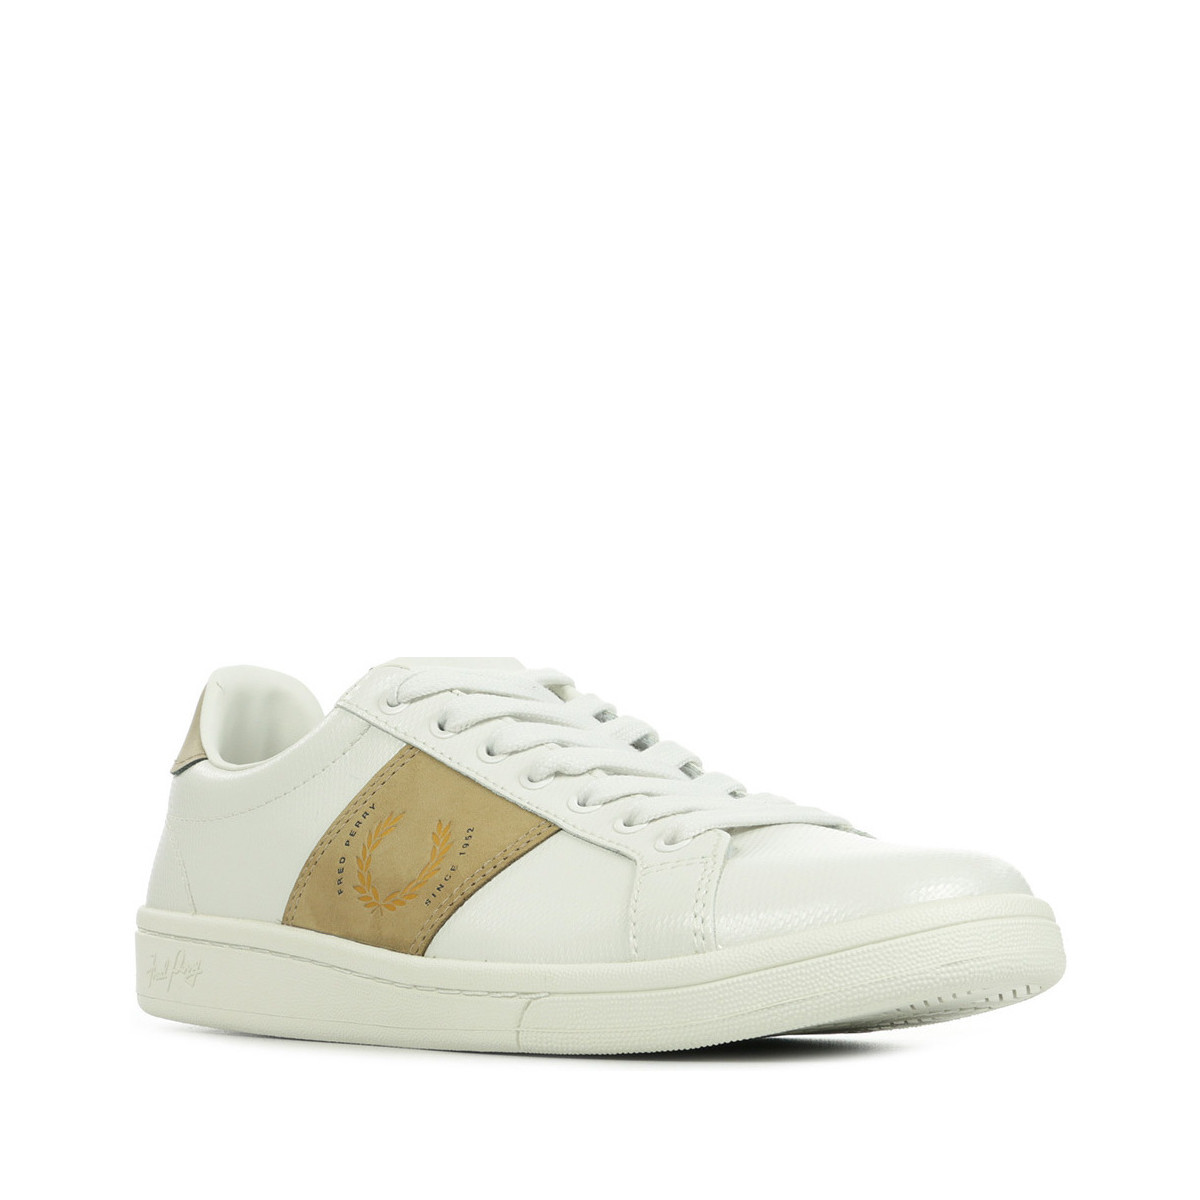 Chaussures Homme Baskets mode Fred Perry Pique Emb Beige